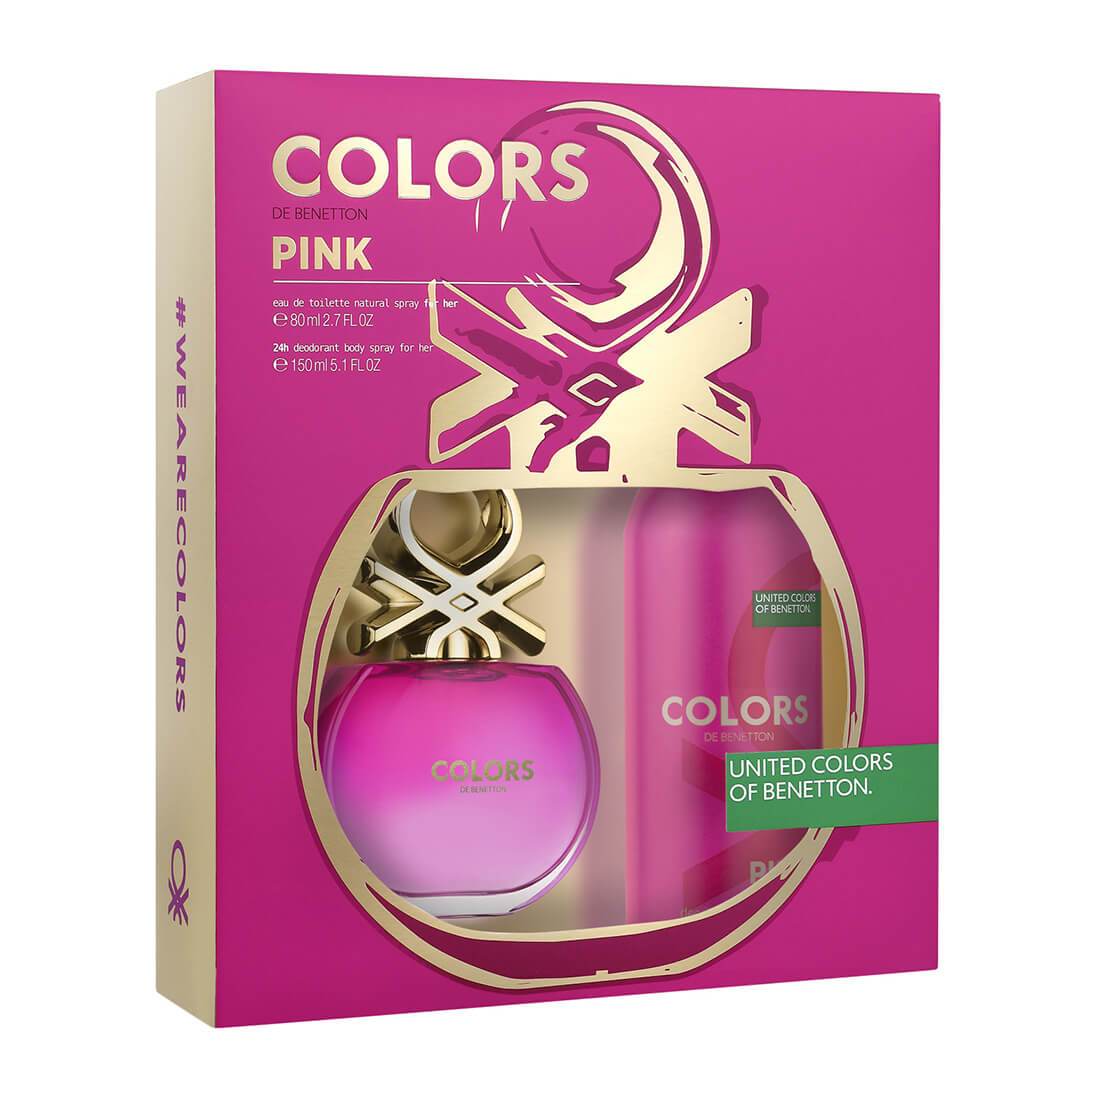 United Colors of Benetton Colors Pink Fragrance Gift Set Perfume for Women 80ml + Deodorant Spray 150ml